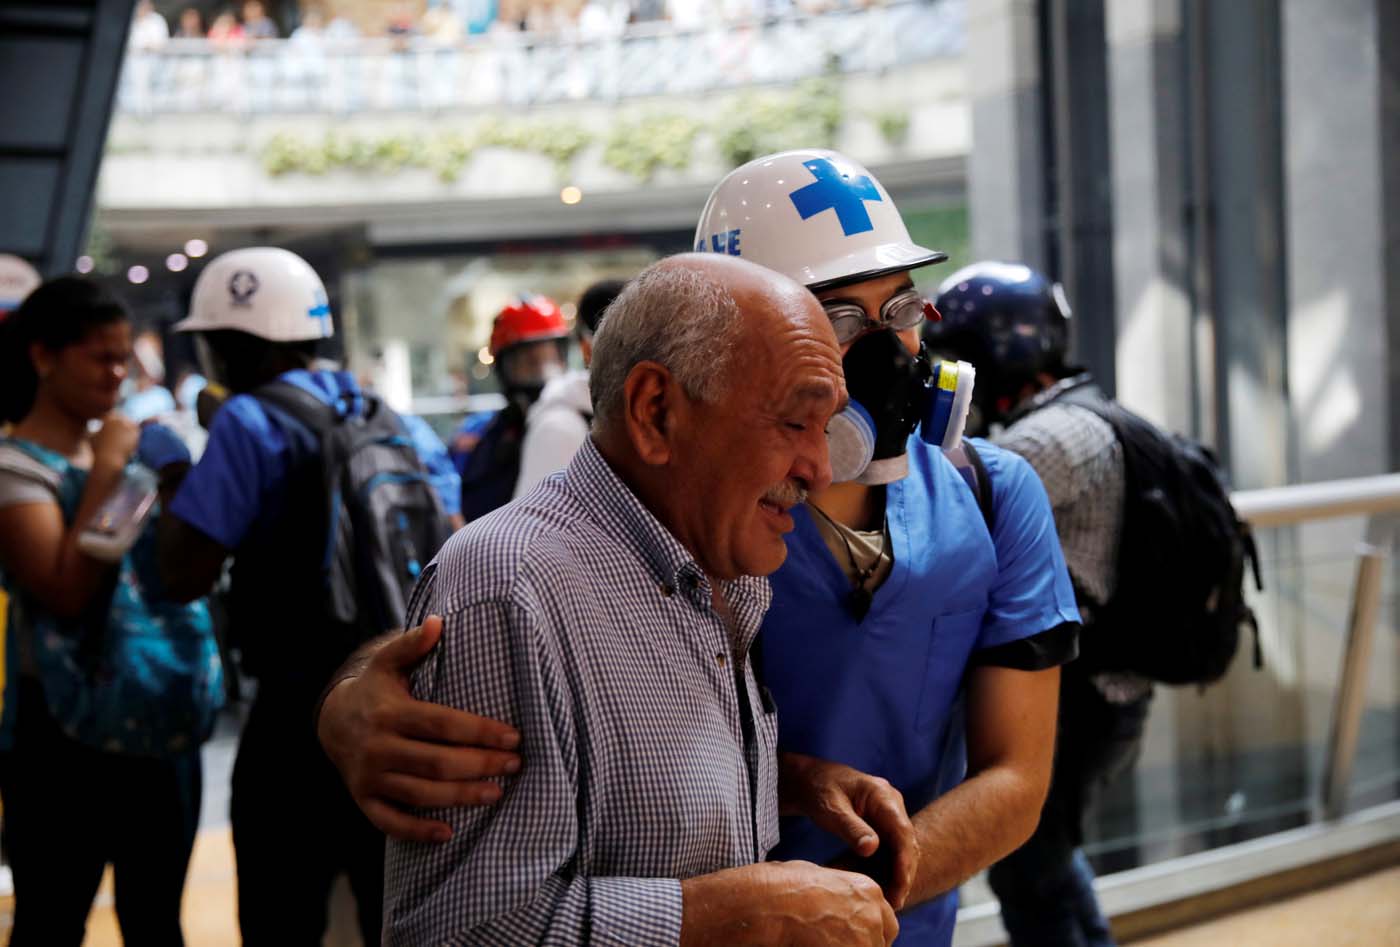 A man is helped as he leaves a shopping mall after smoke from tear gas fired by security forces got inside of it during clashes at a rally against Venezuelan President Nicolas Maduro's government in Caracas, Venezuela, July 6, 2017. REUTERS/Carlos Garcia Rawlins